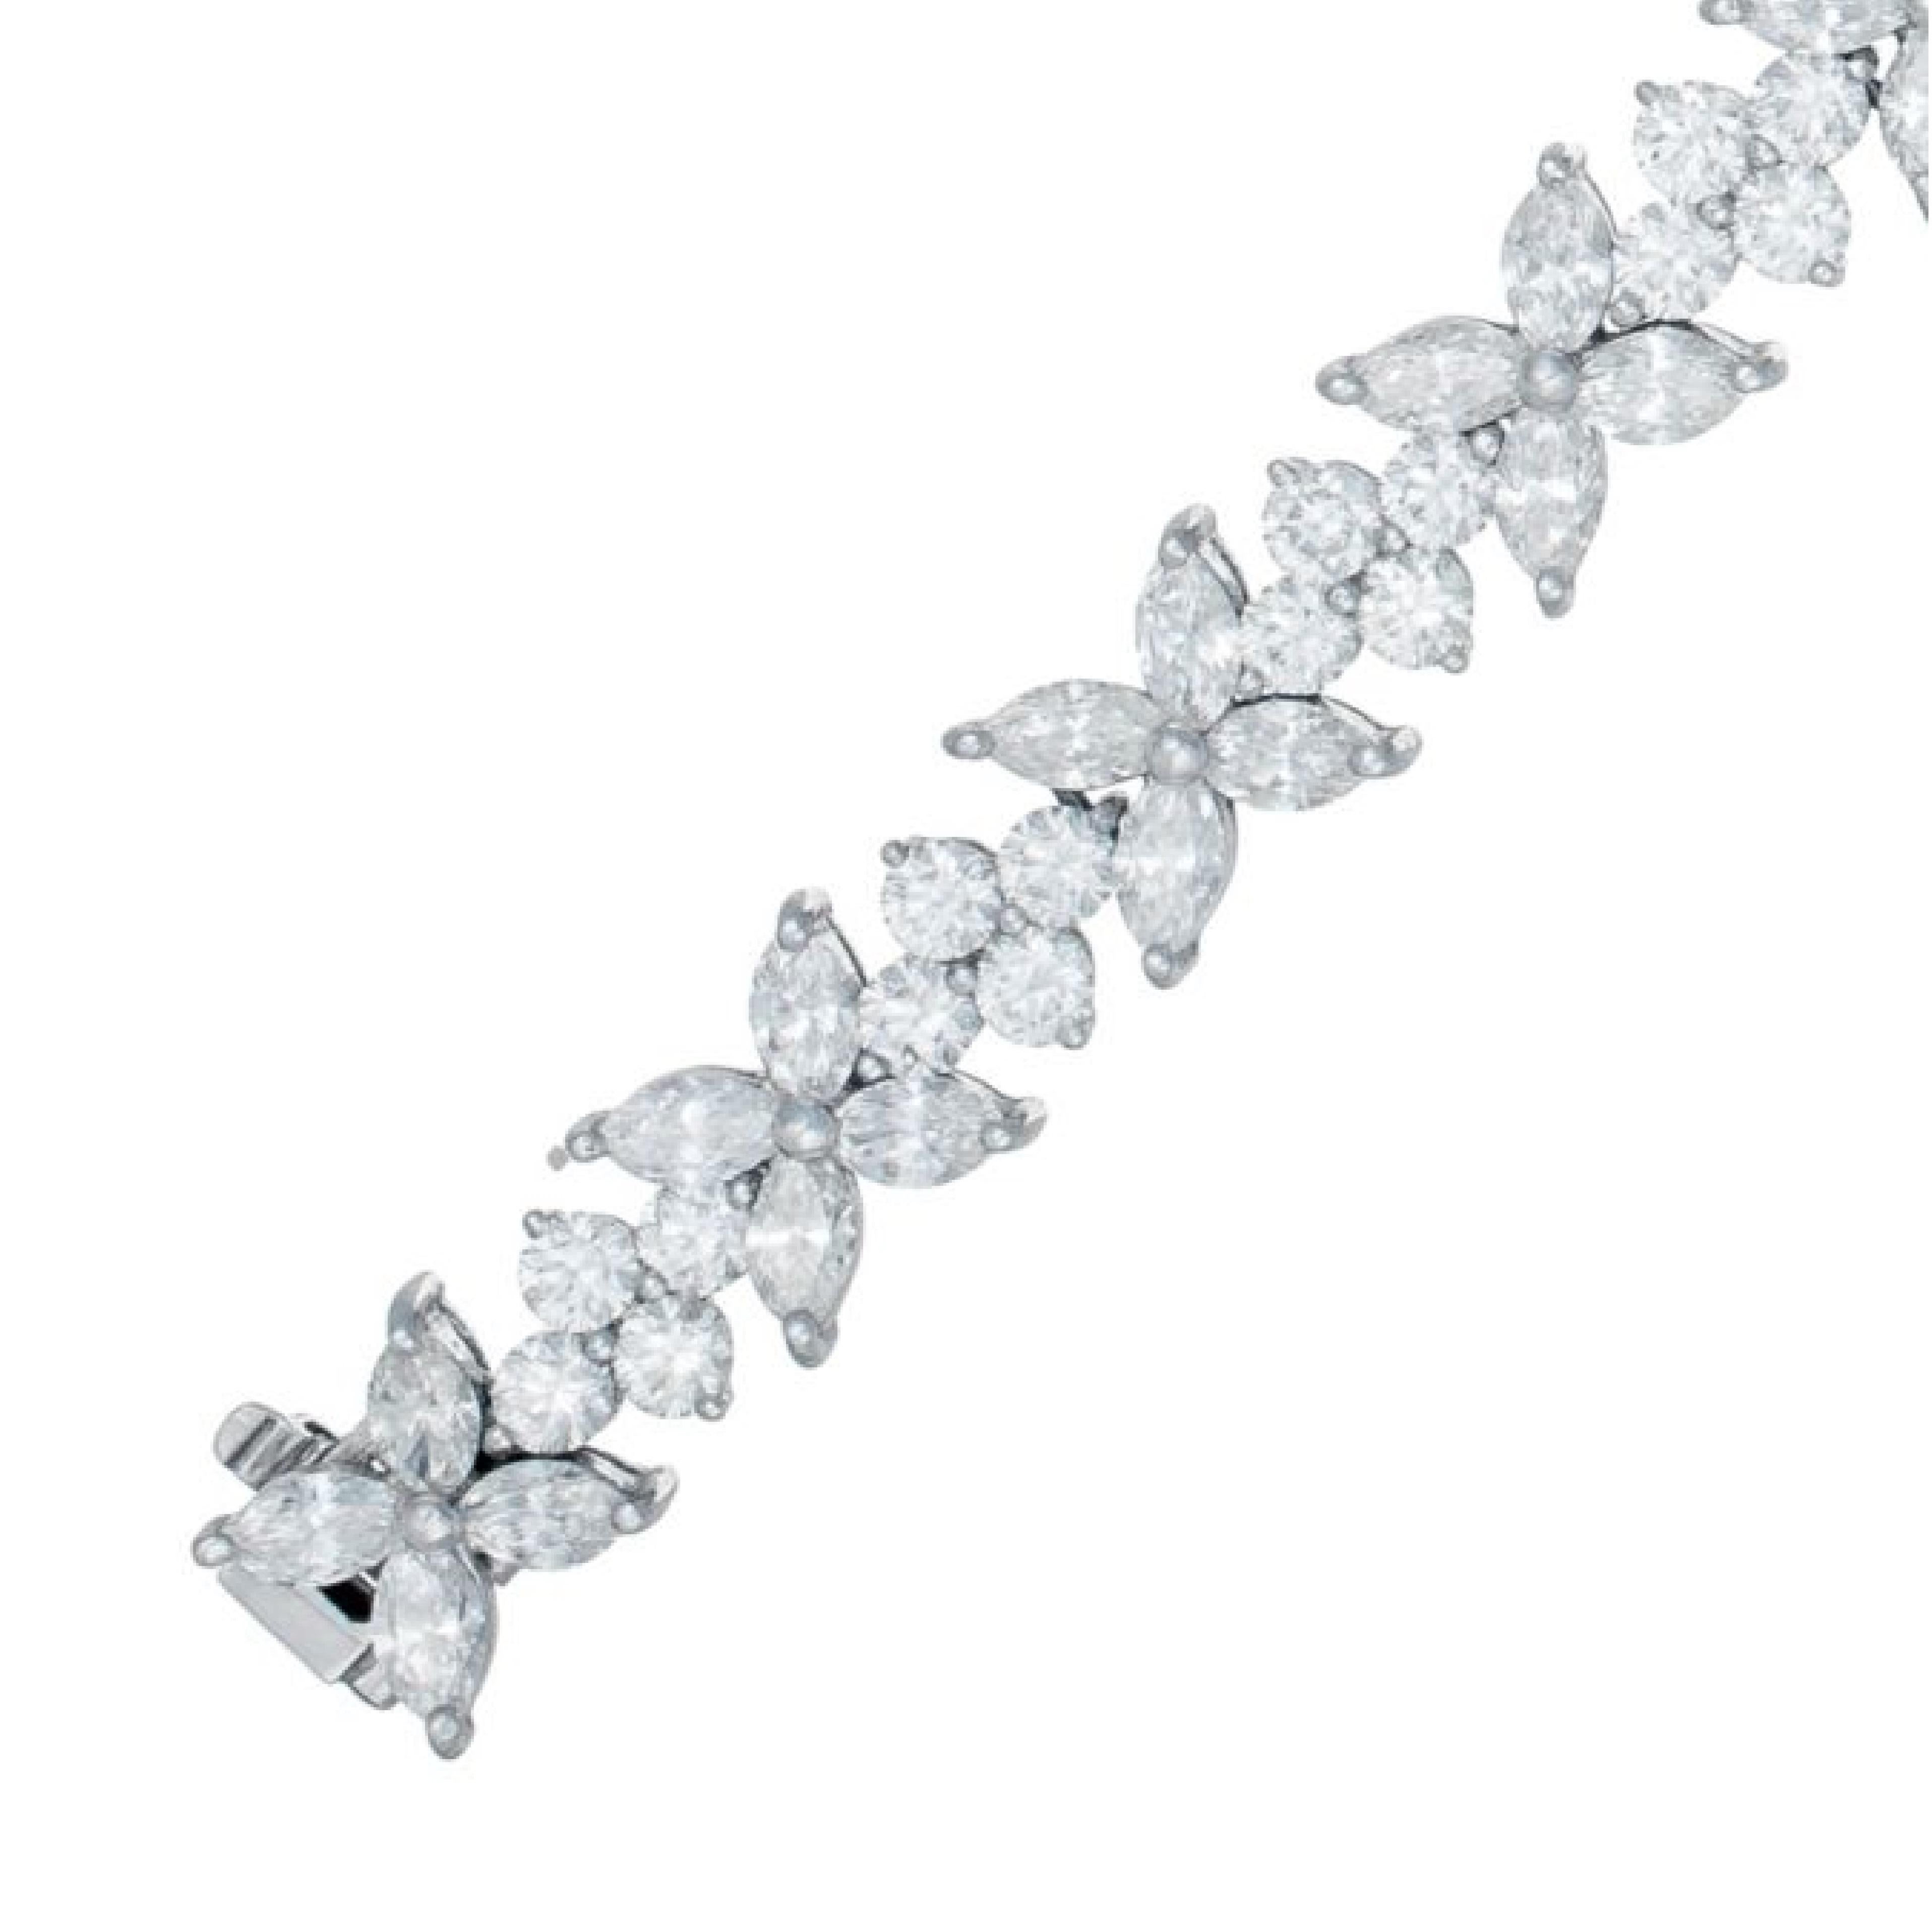 Diamond cluster bracelet
18K white gold bracelet with 16.50 carats of round and marquise cut diamonds in flower clusters 

Length: 7.5